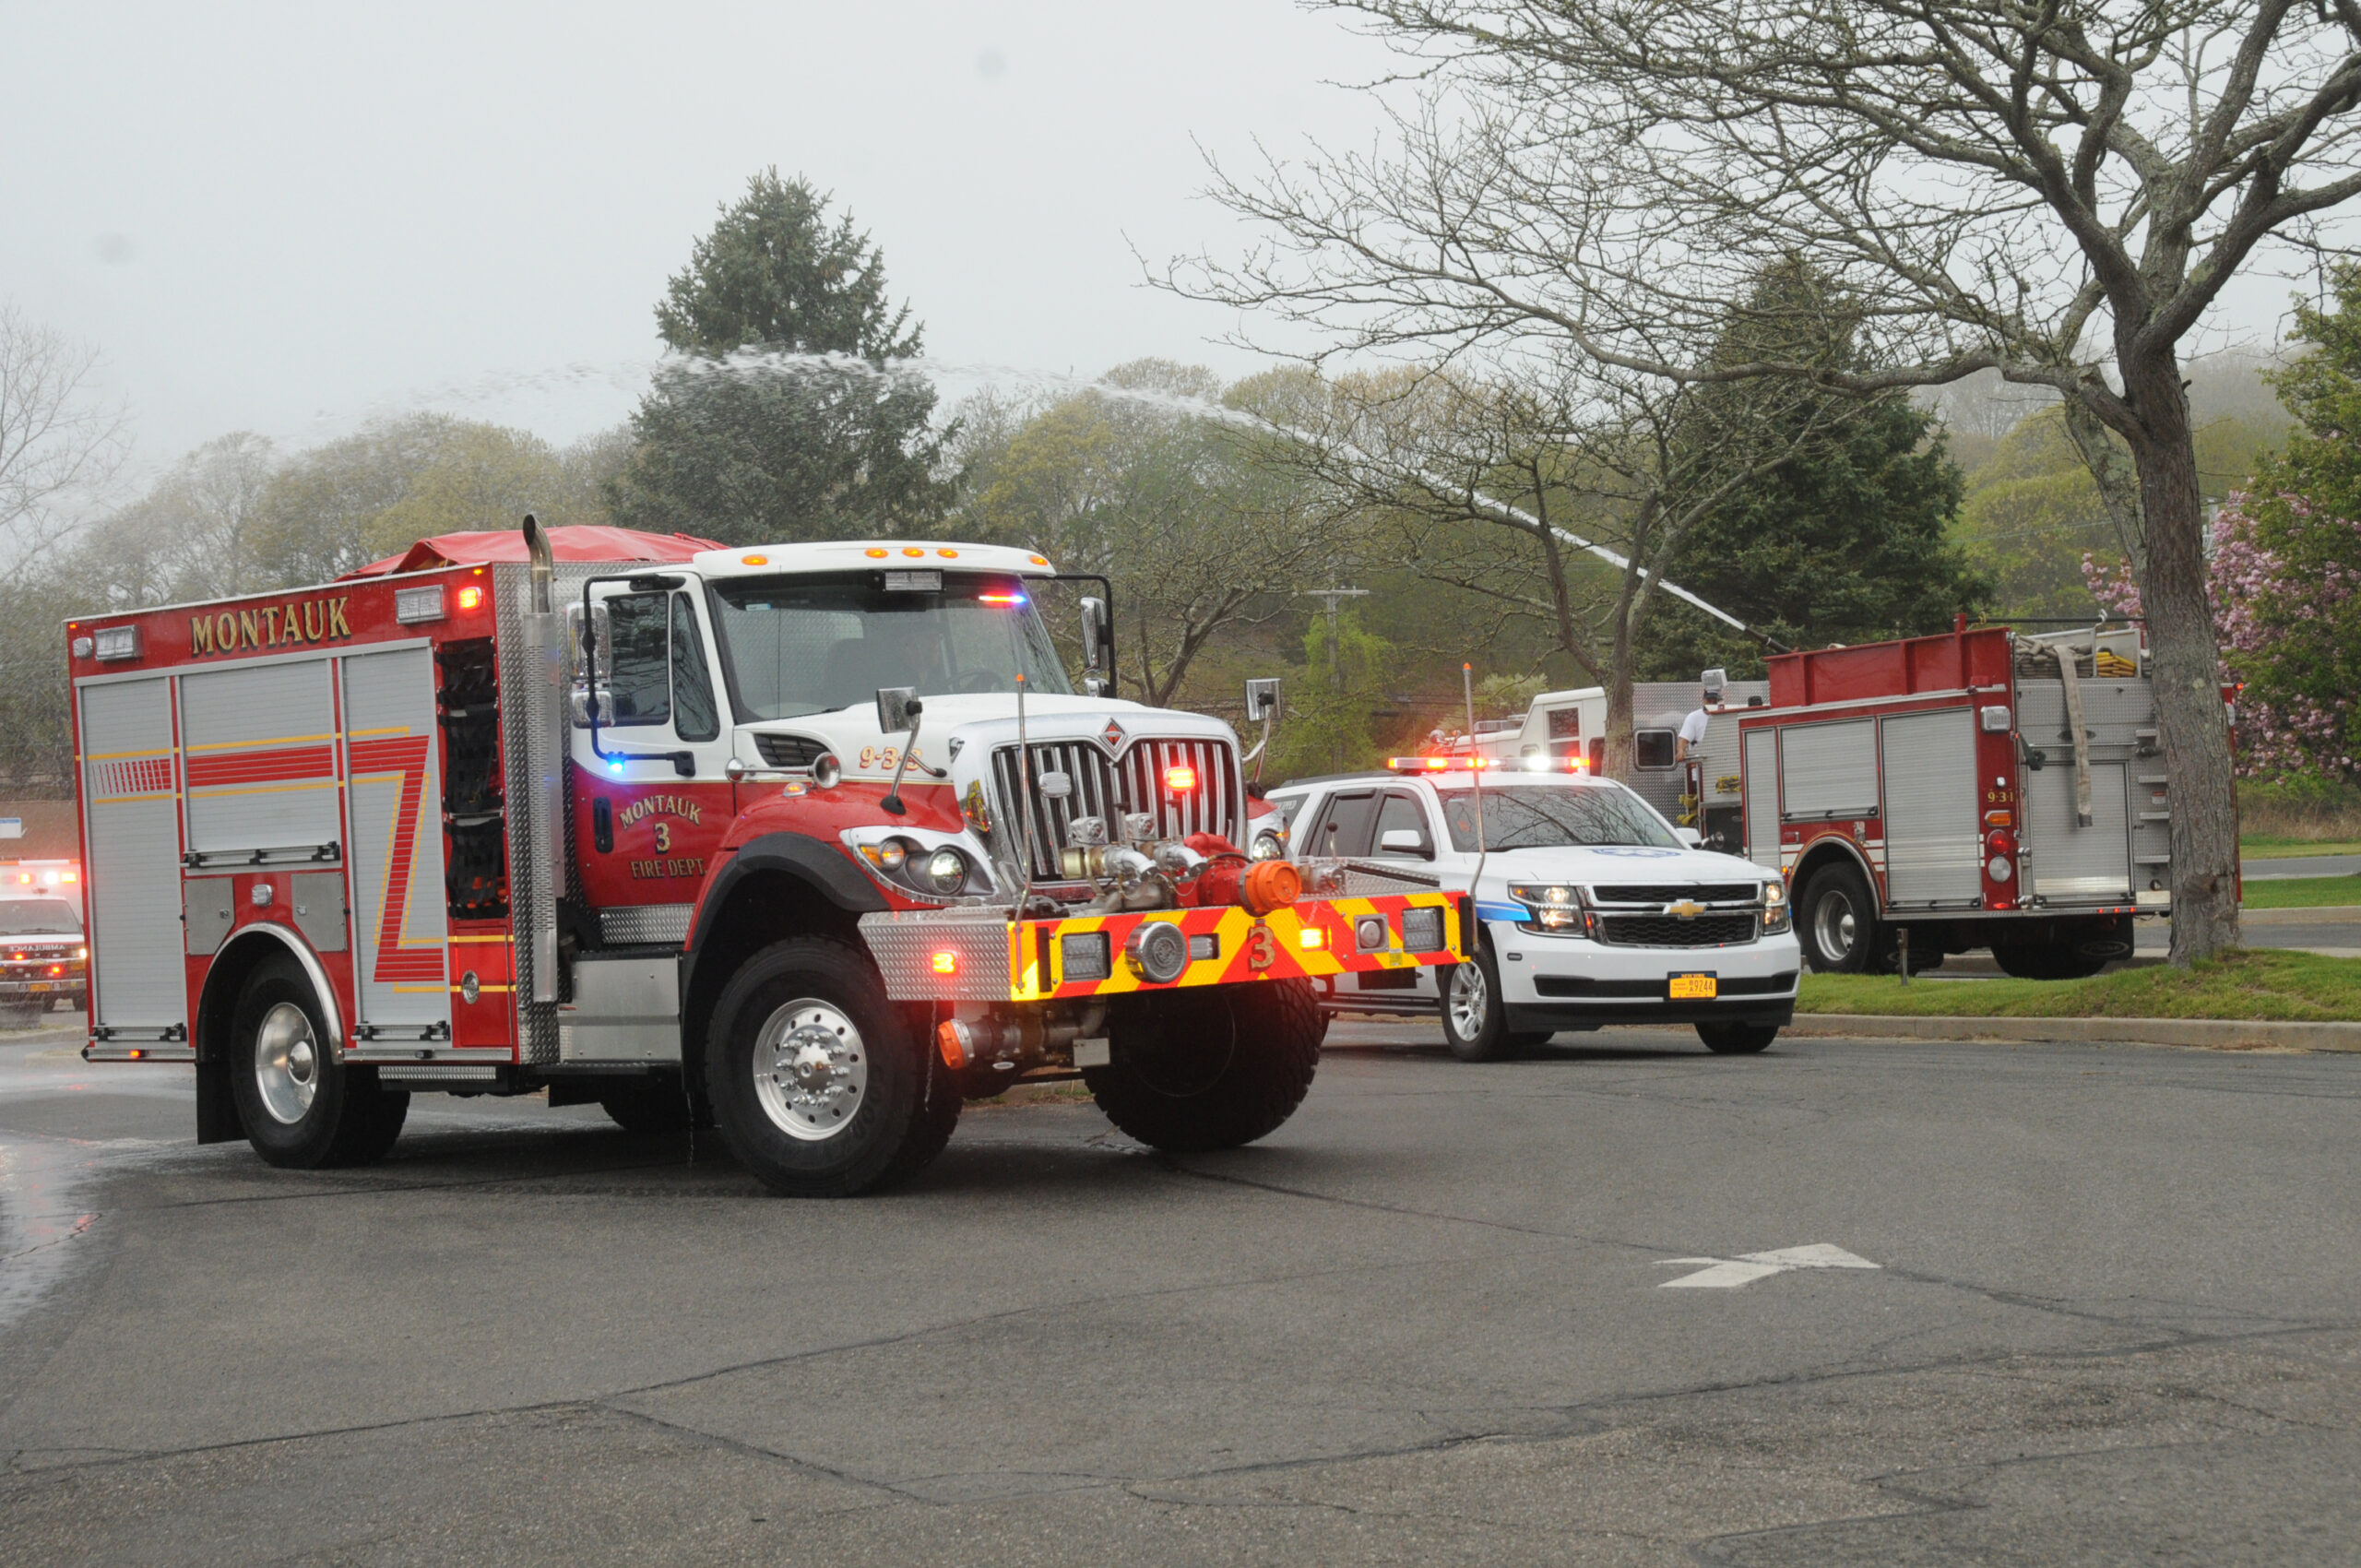 The Montauk Fire Department members and their families celebrated with a traditional 